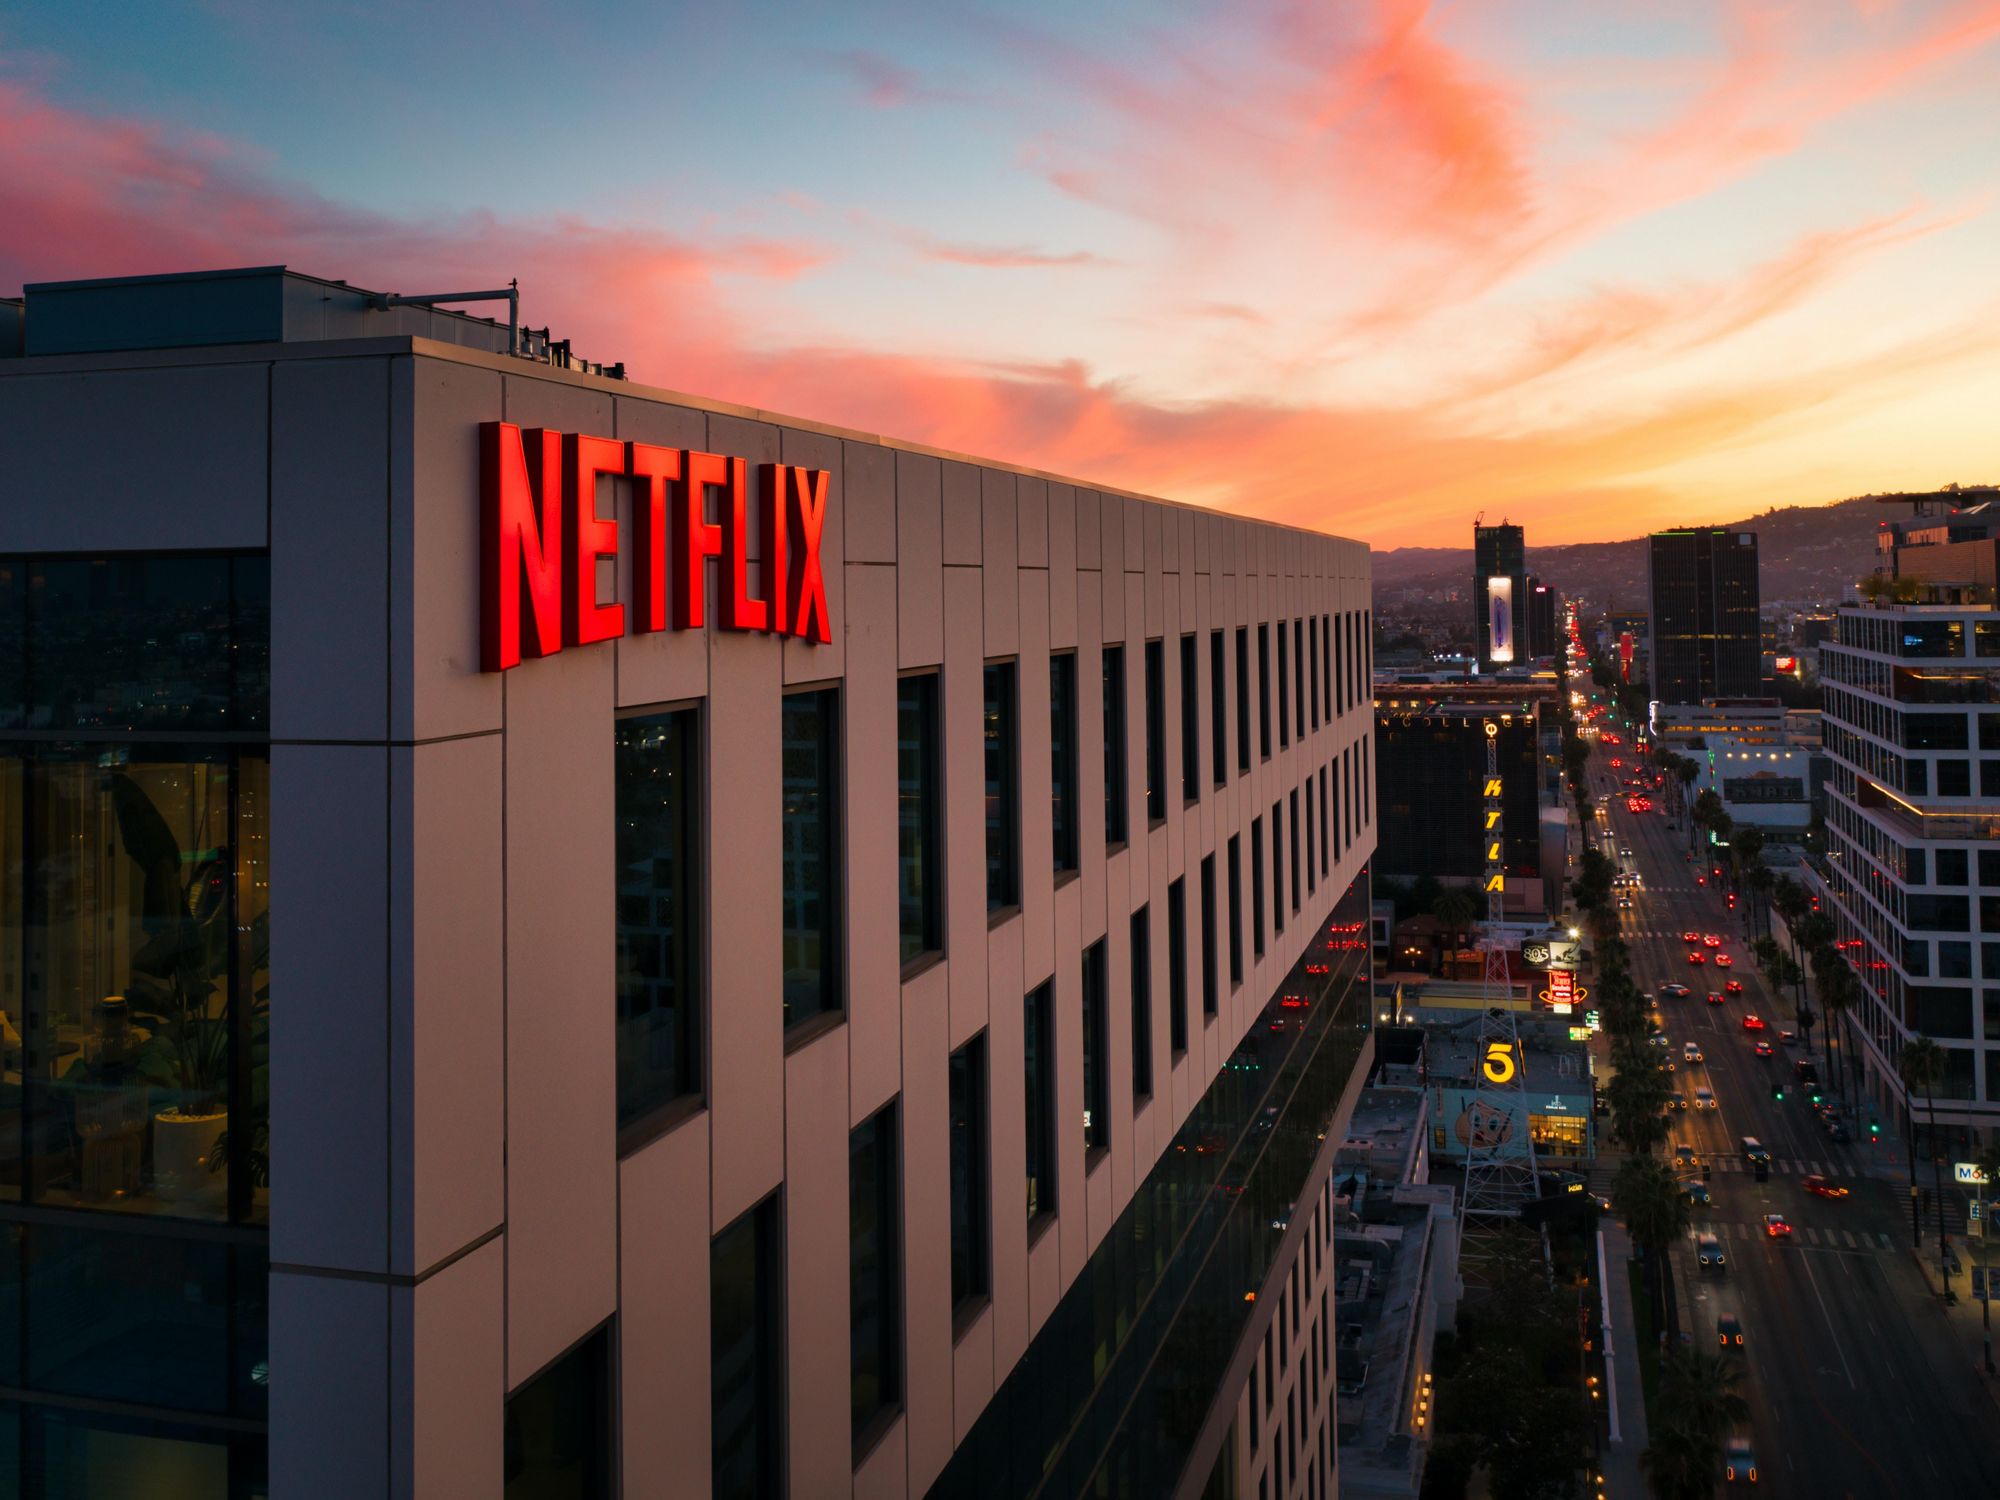 Netflix Heads to AnimeJapan with an Expanded Slate Embracing Diverse Genres  - About Netflix